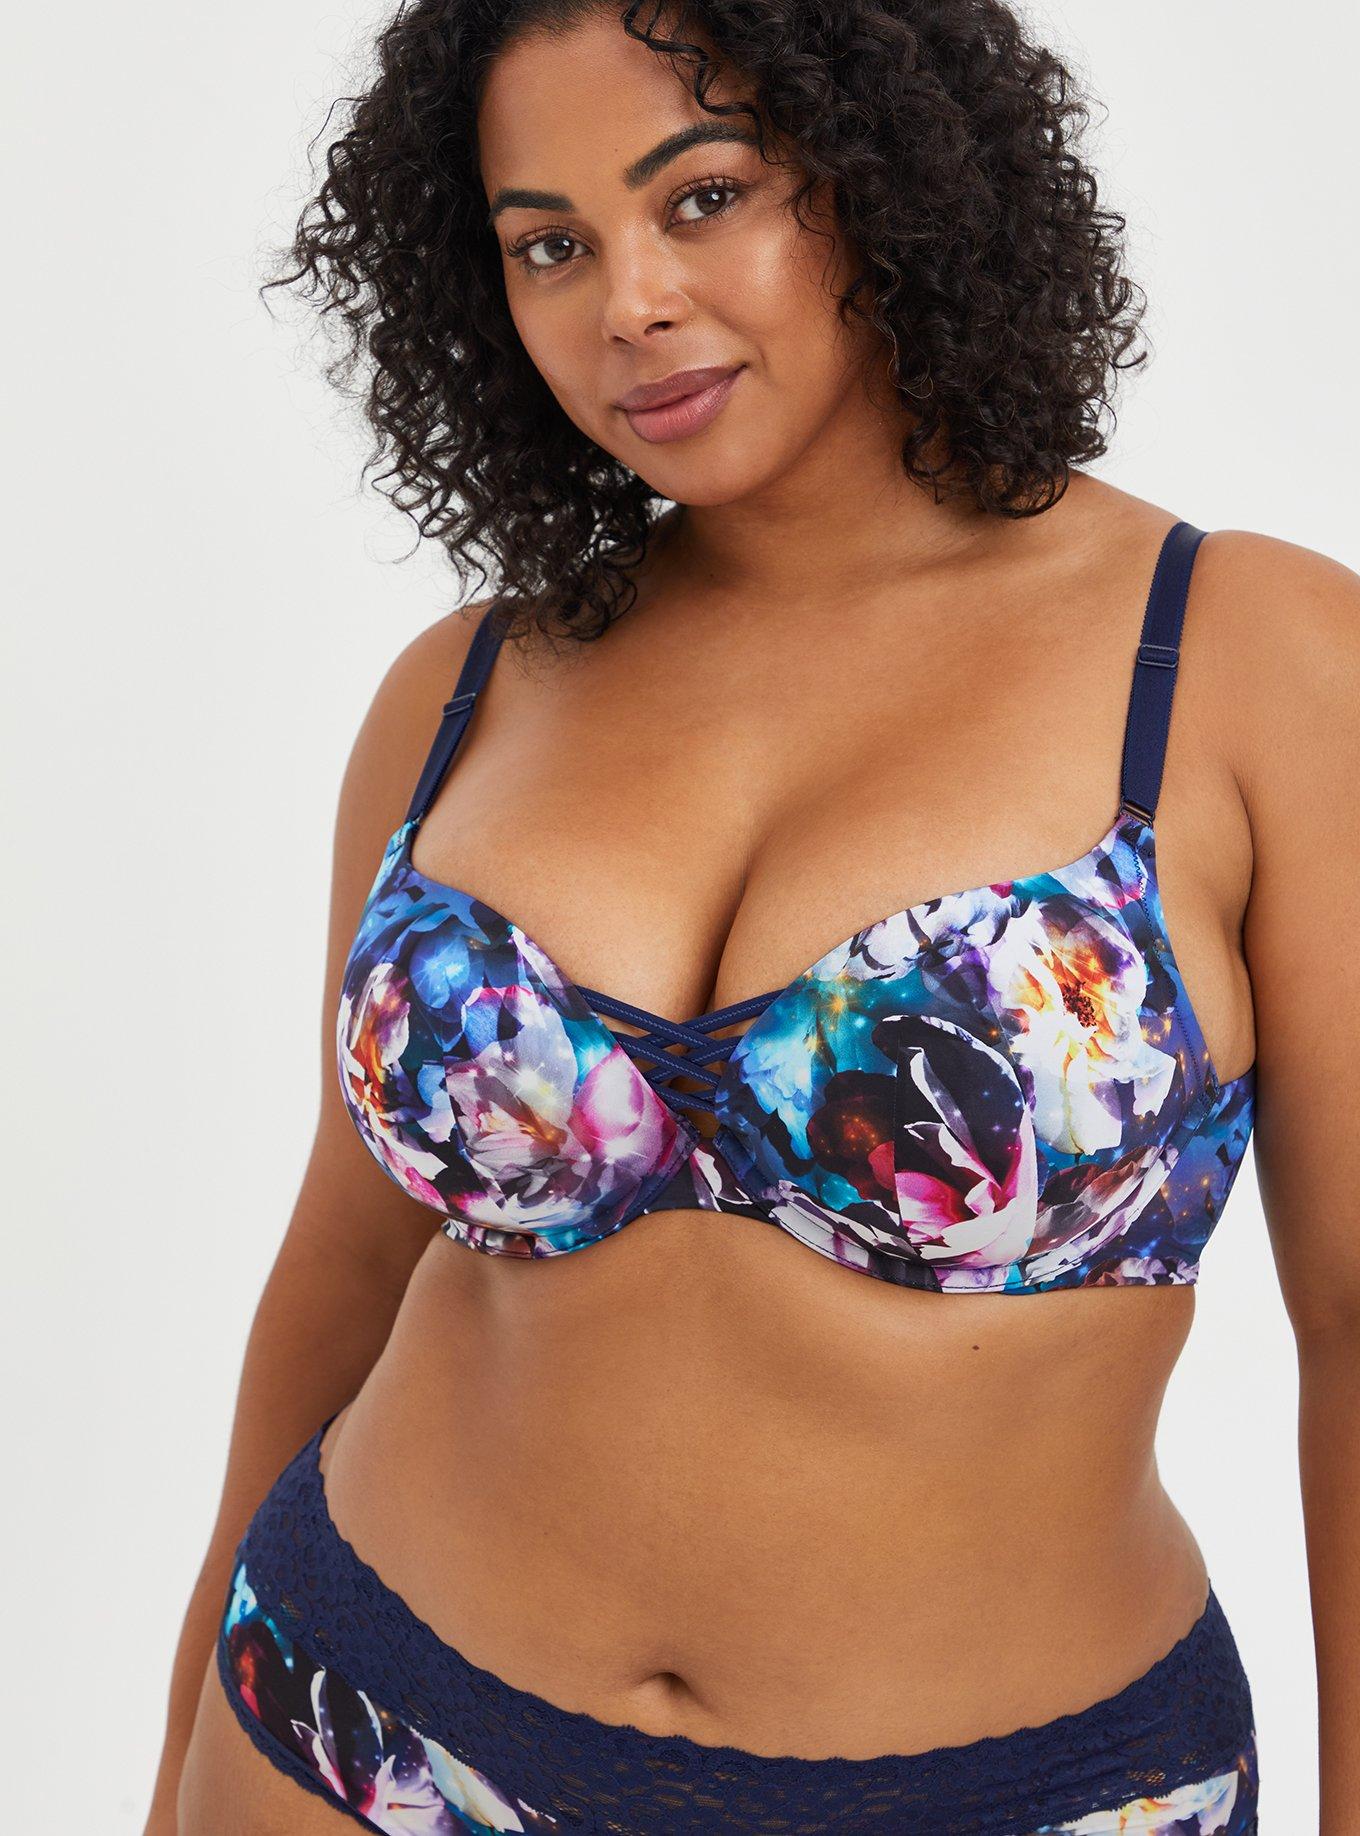 Torrid 40D 42D Plunge Push-Up Floral Lace Strappy Straight Back Bra